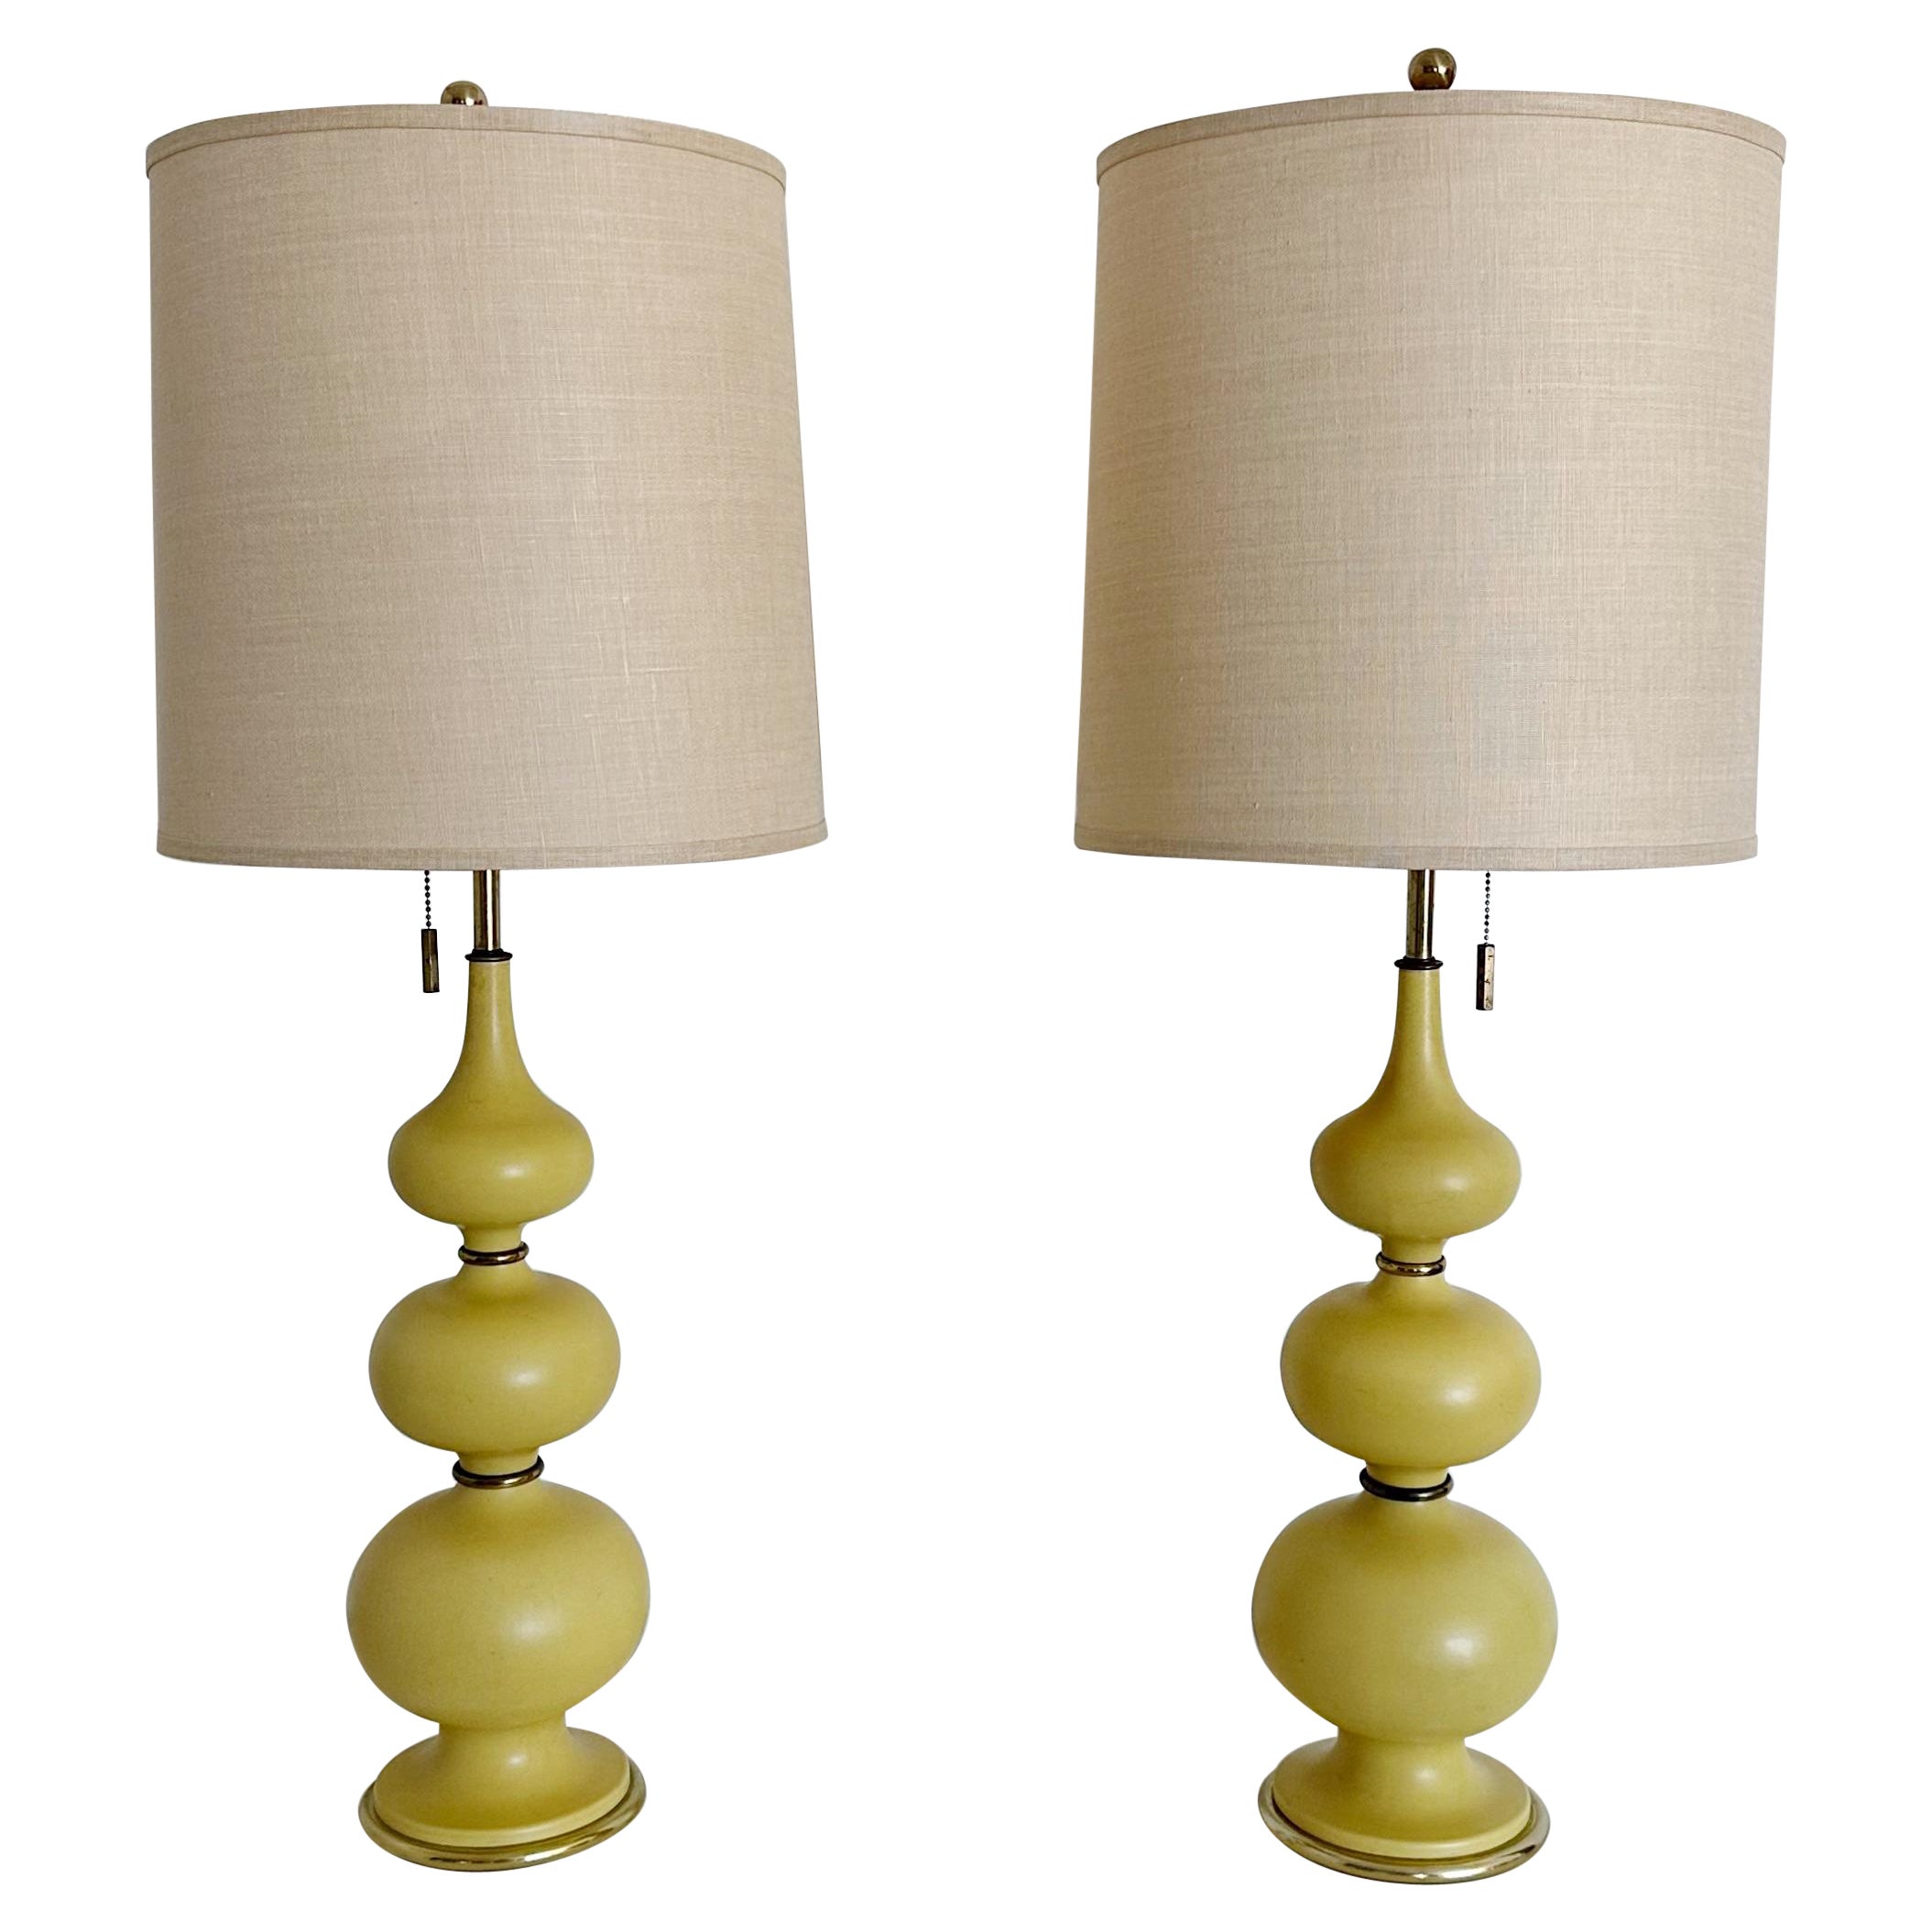 Pair of Lamps by Gerald Thurston for Lightolier, 1950s